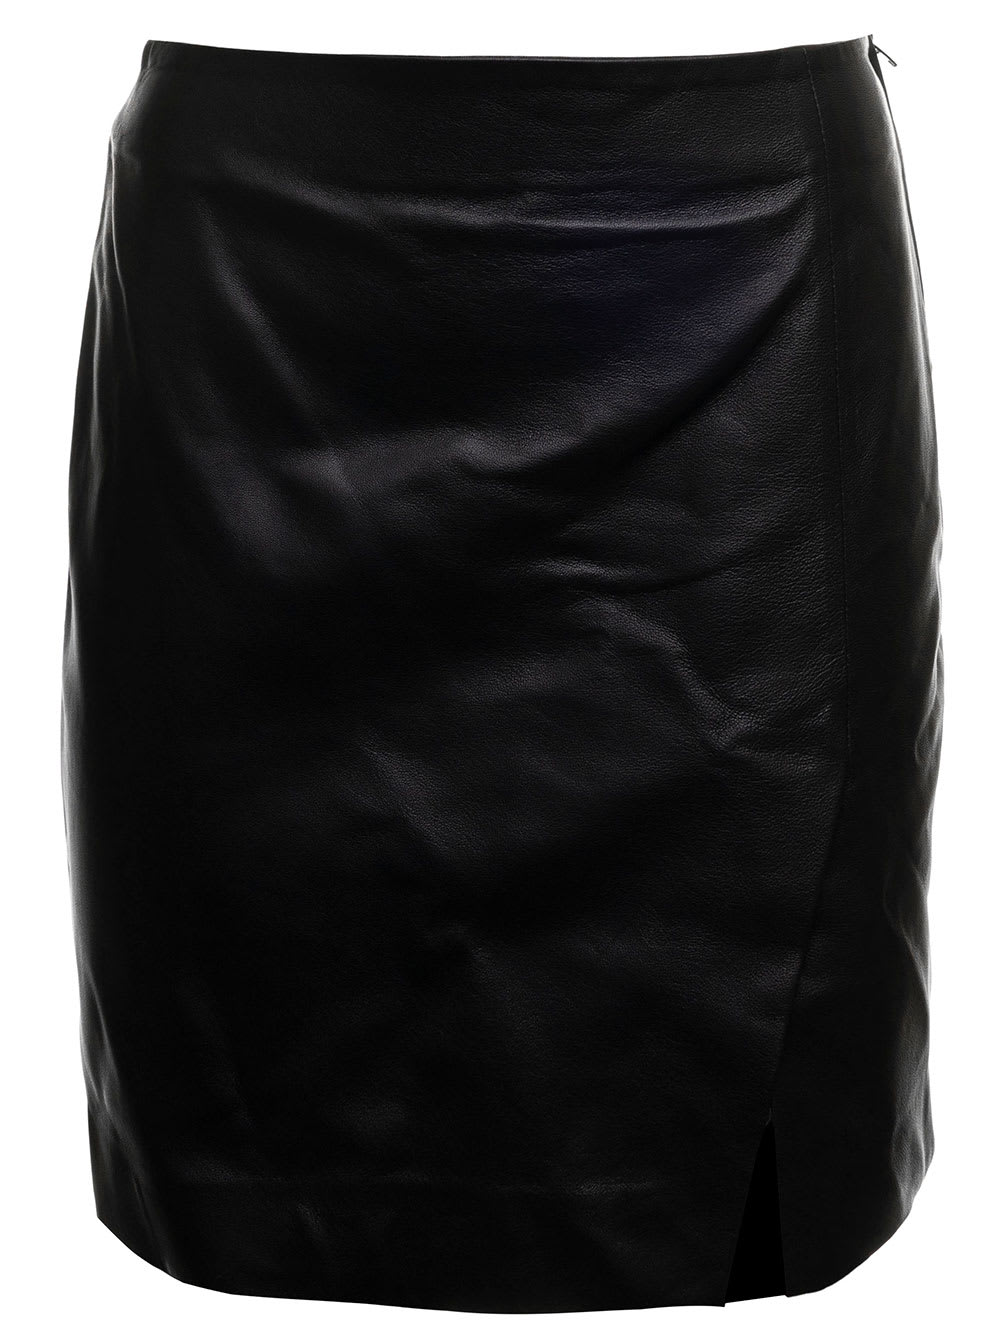 Black Leather Skirt With Slit Federica Tosi Woman